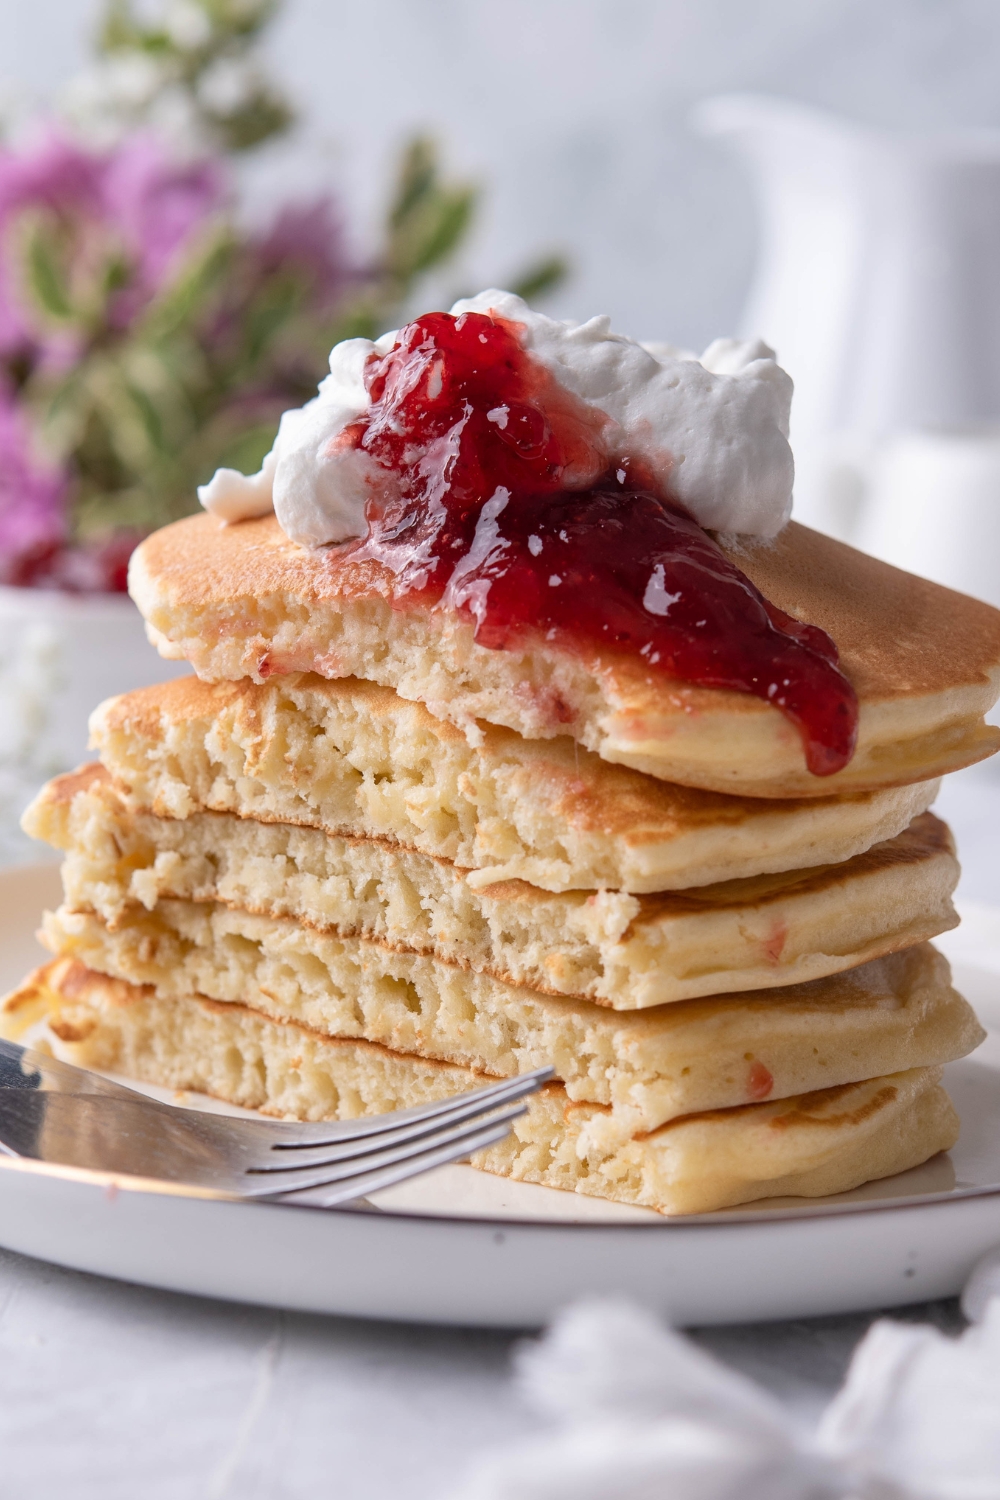 A stack of 5 flapjacks on a plate topped with strawberry jam and a dollop of whipped cream. The stack is sliced almost in half to show the fluffy interior of the flapjacks.